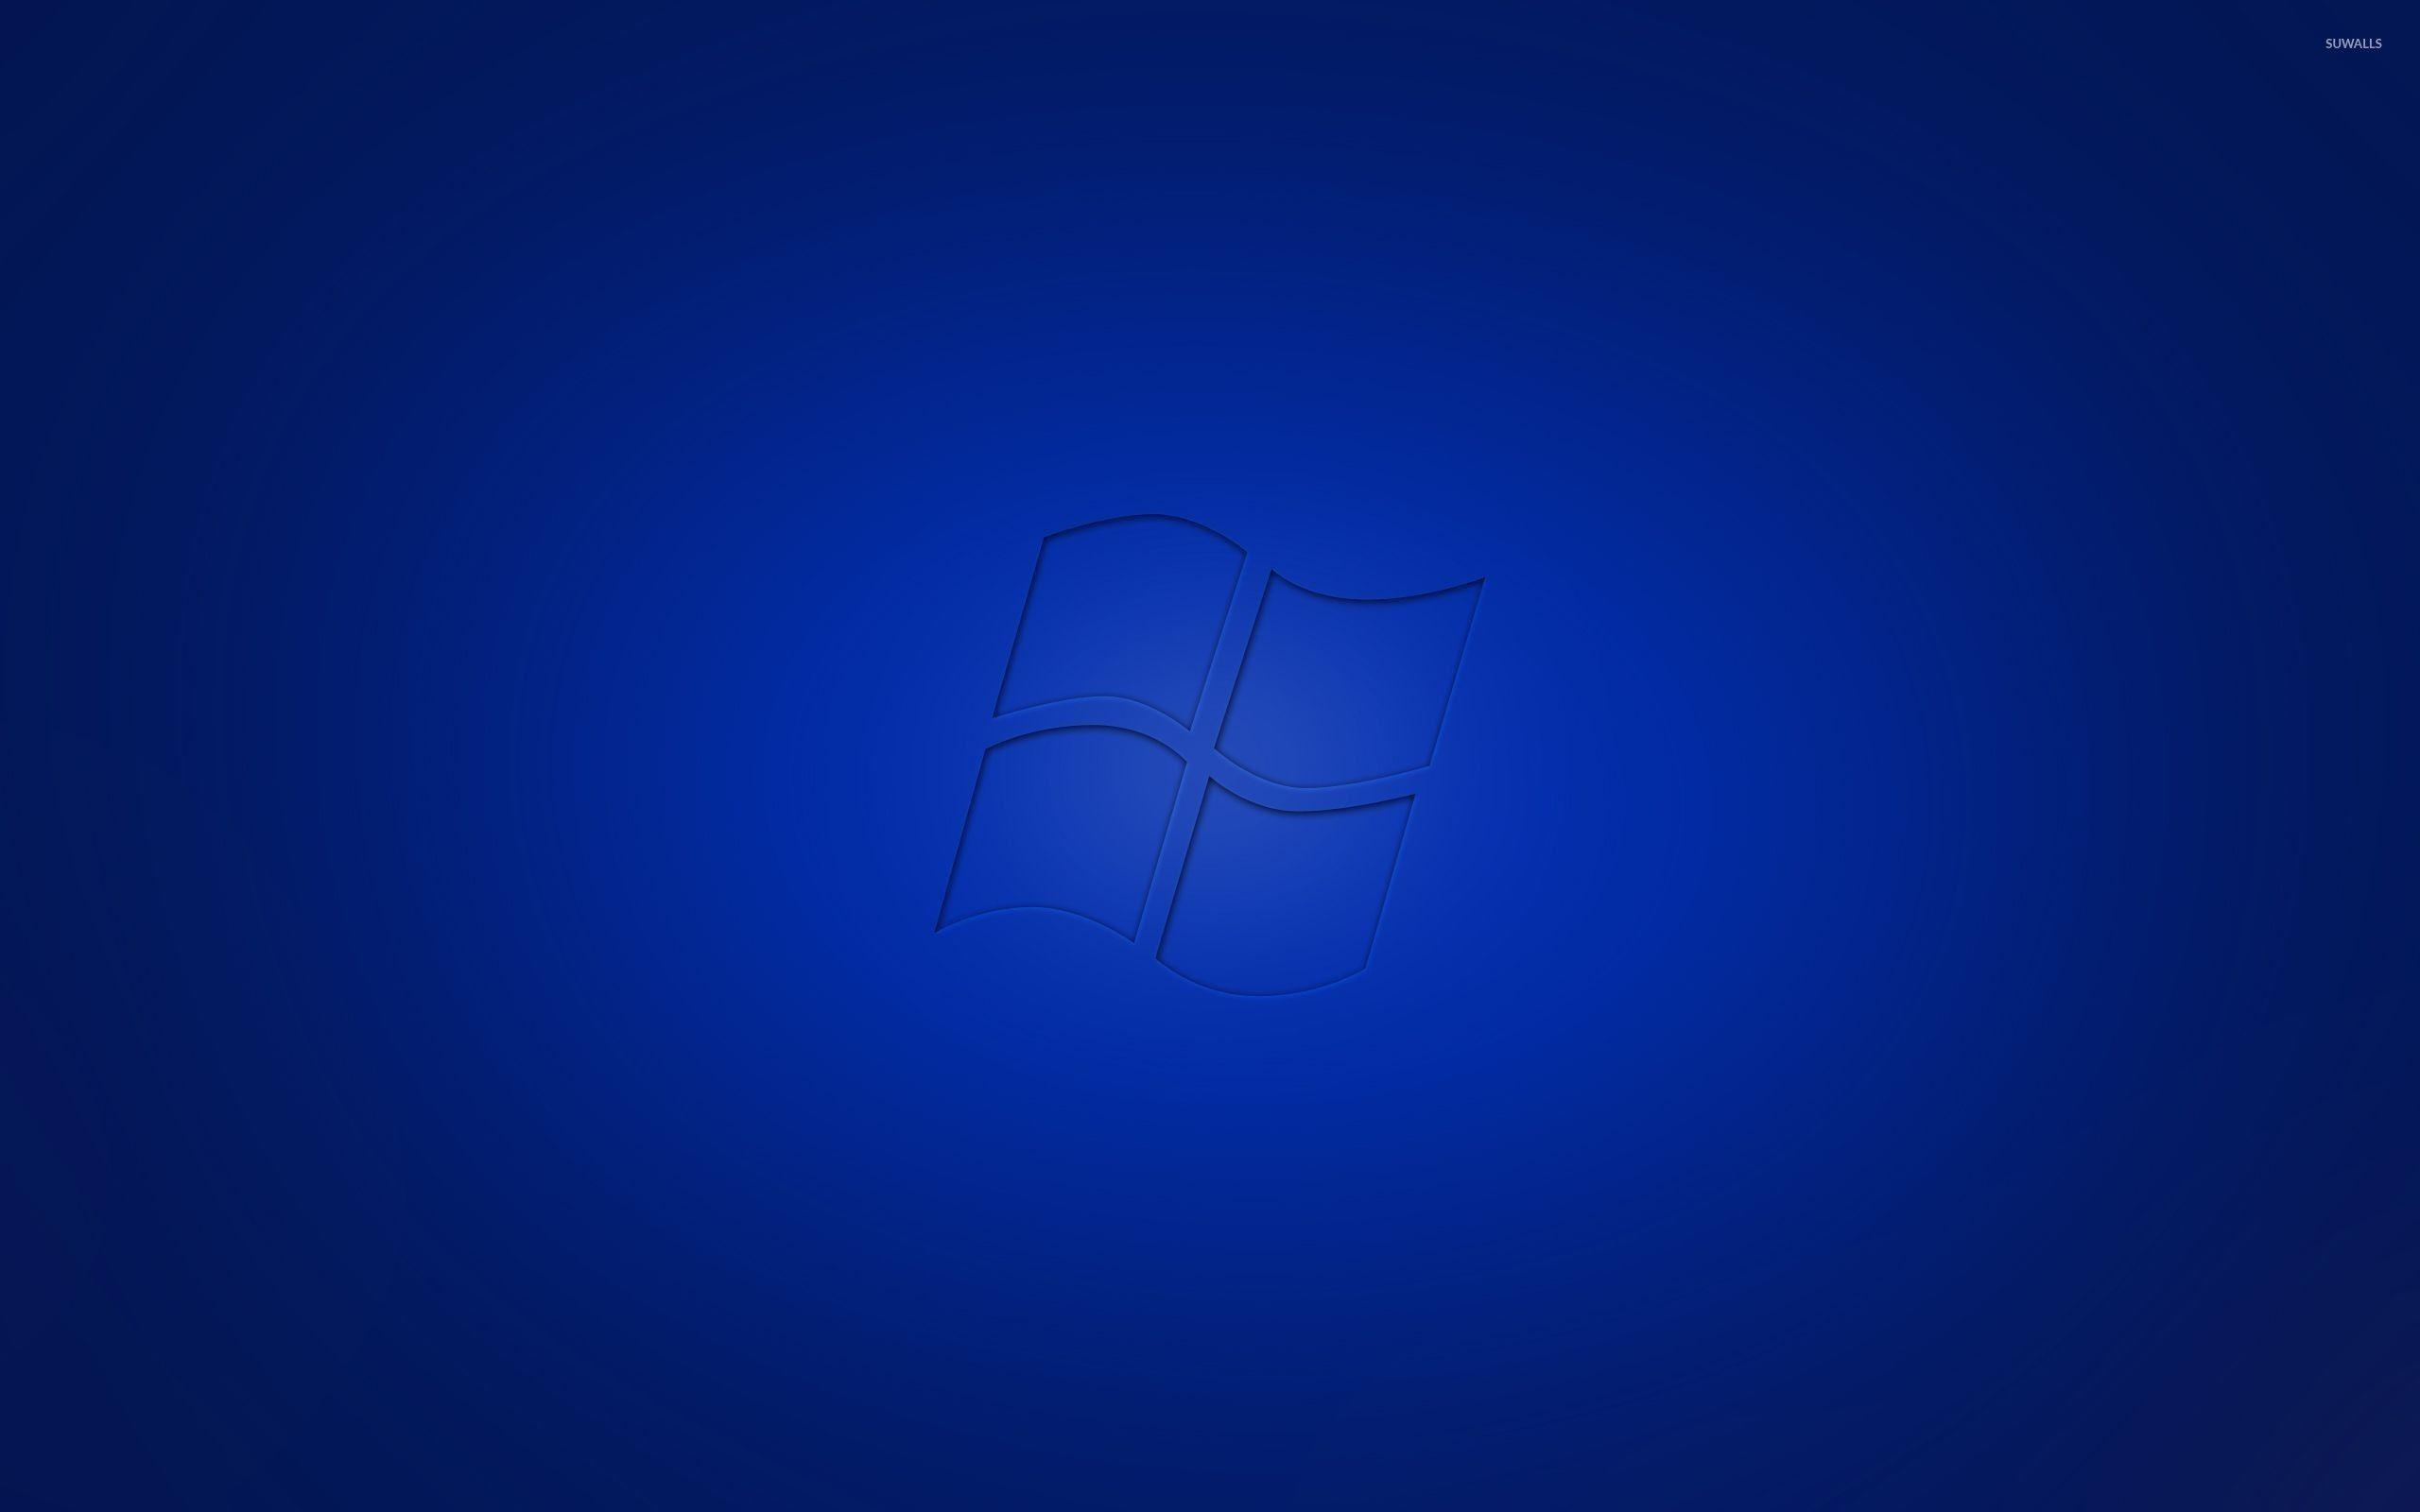 Blue Windows Wallpapers Top Free Blue Windows Backgrounds